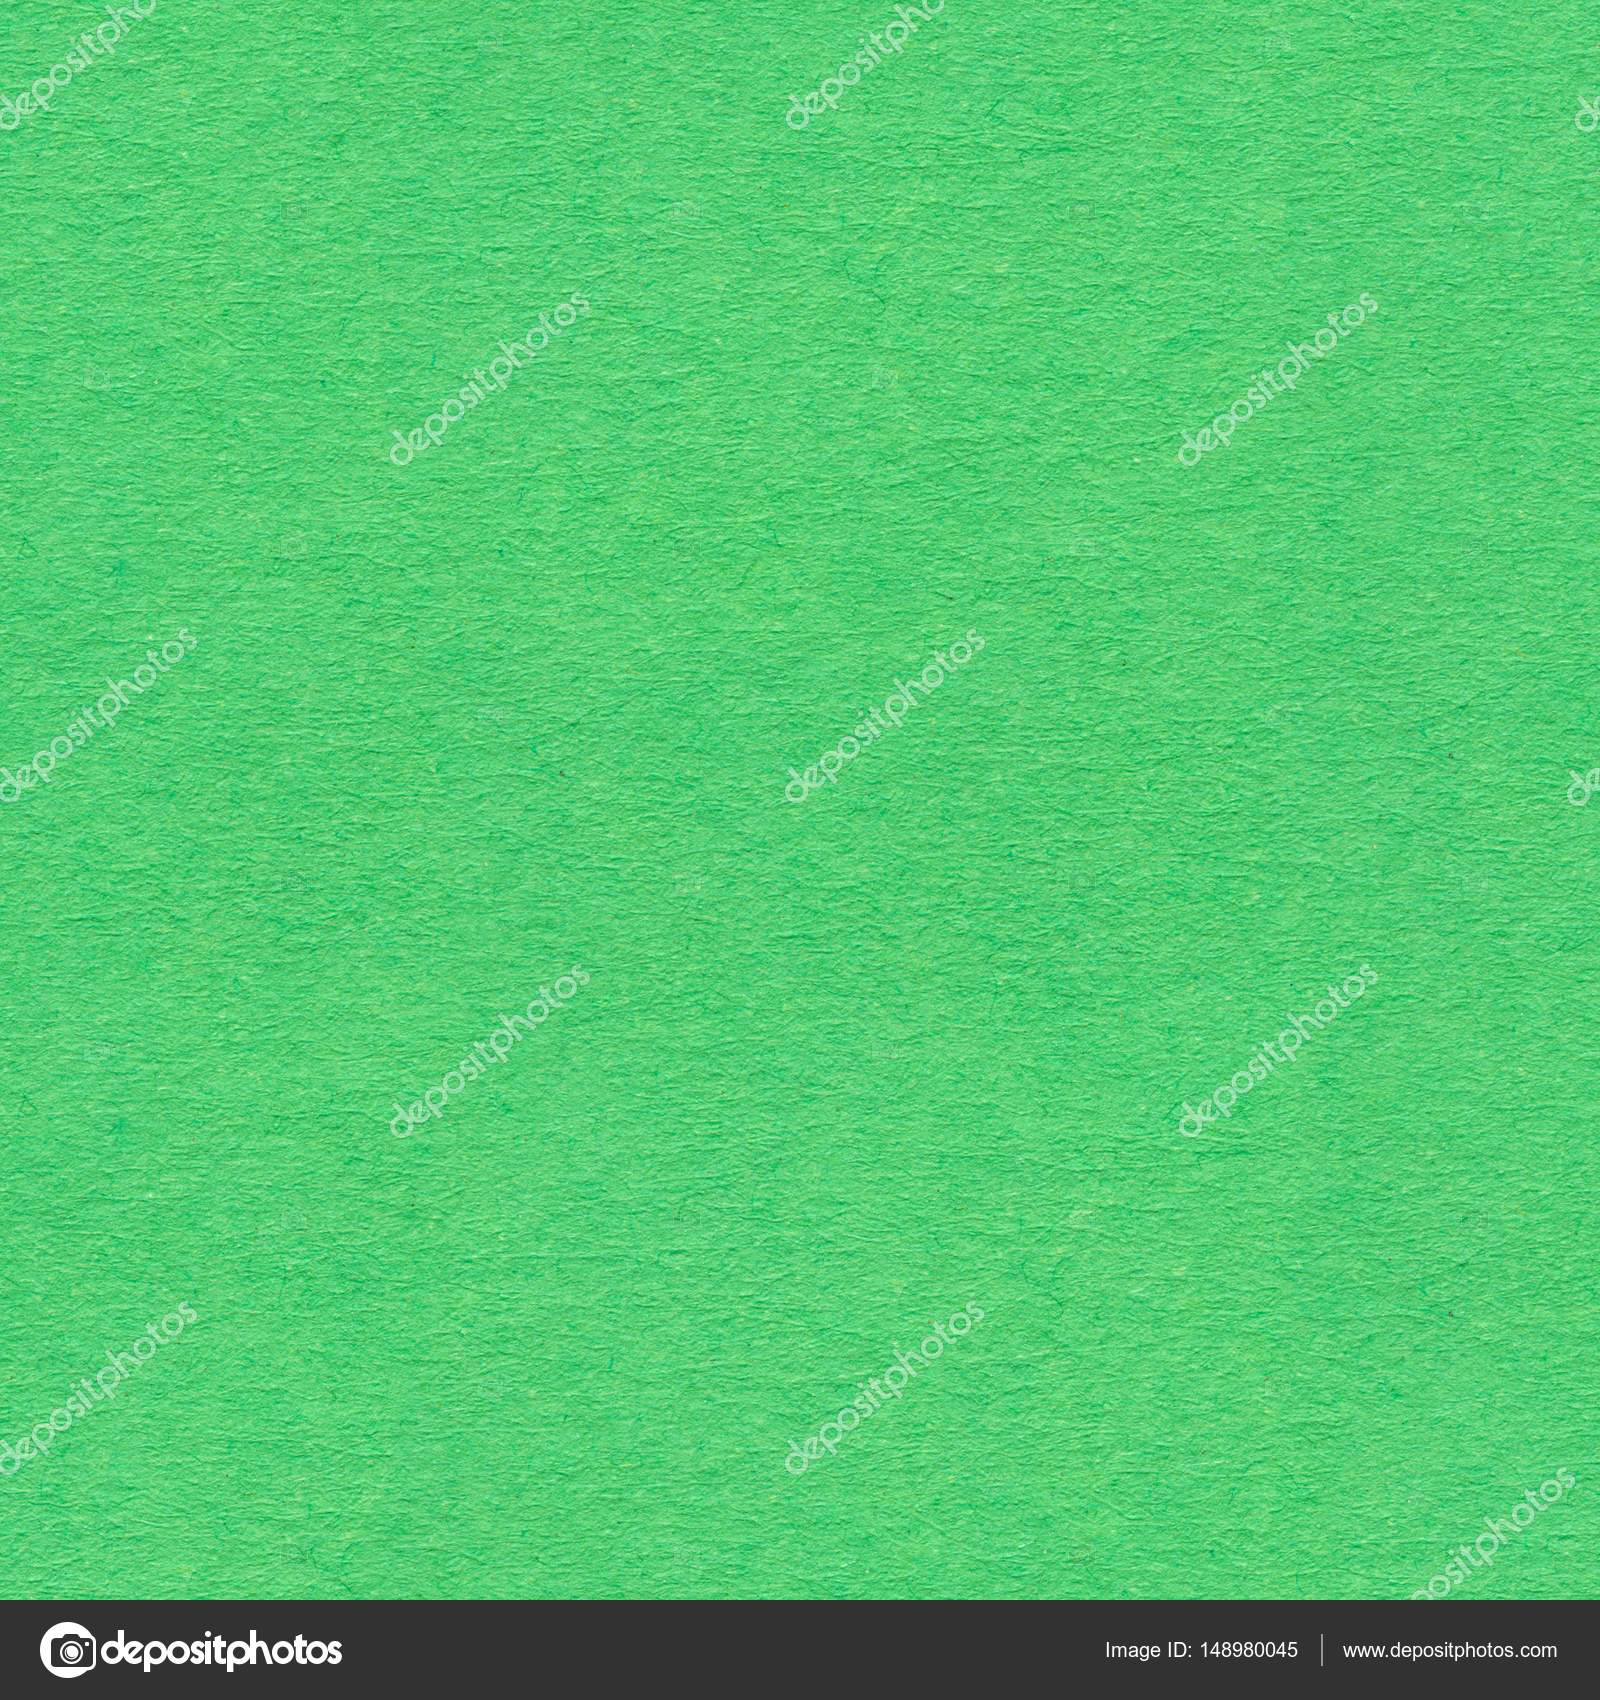 Green Felt As Background Or Texture. Seamless Square Texture. Tile